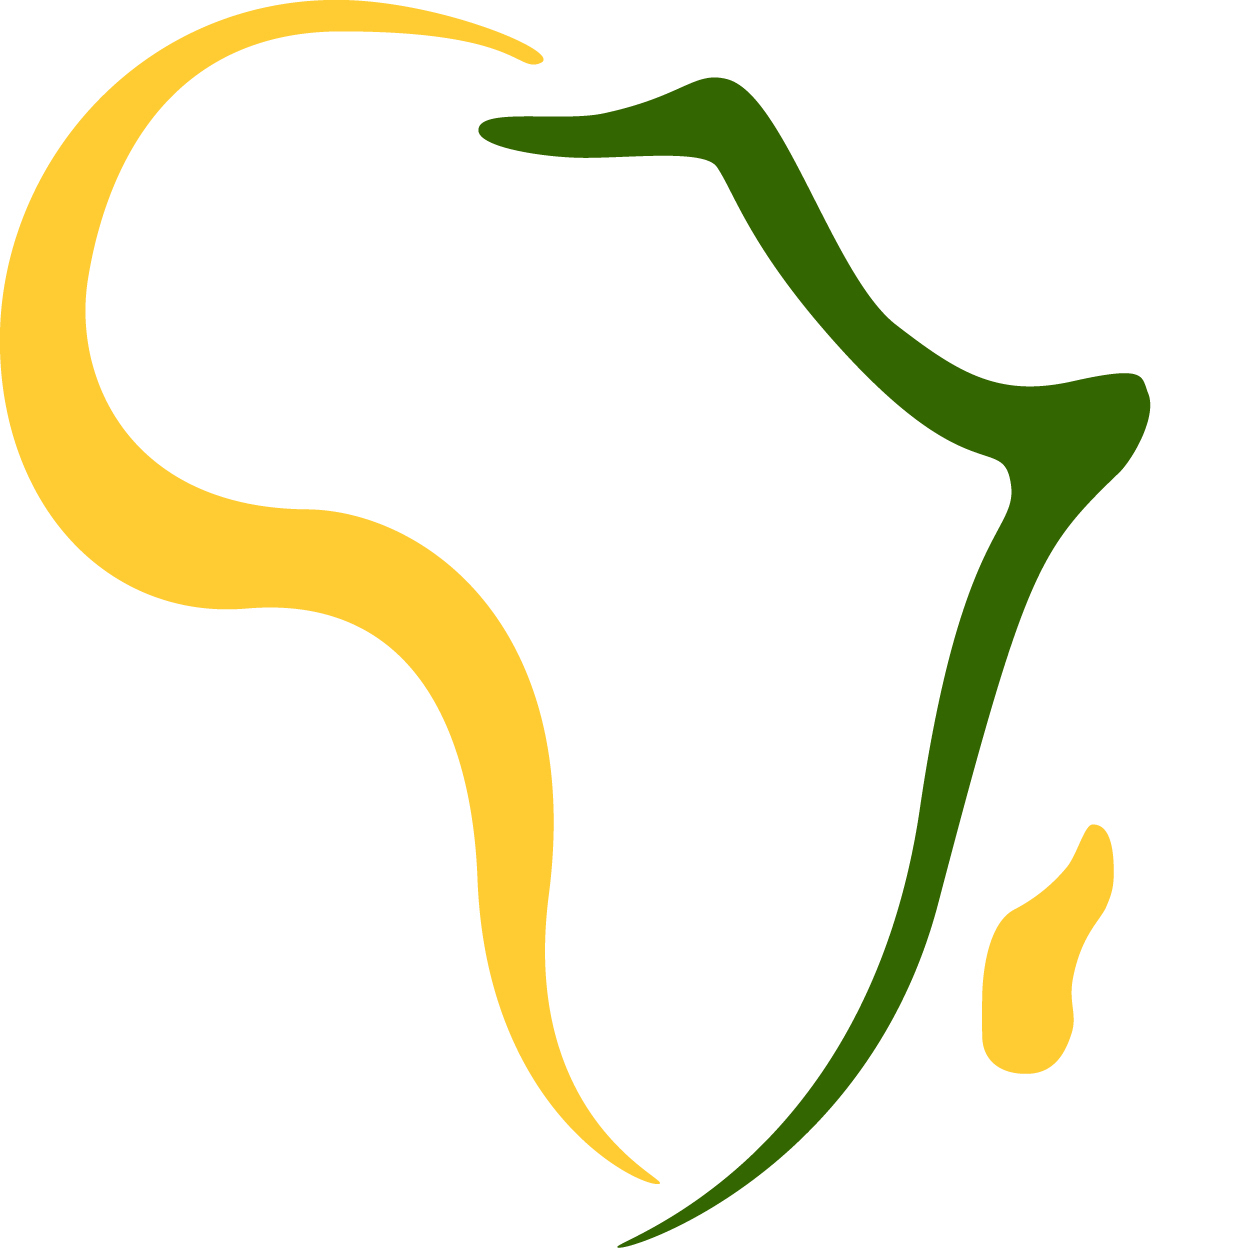 Map campinglifestyle . Africa clipart logo